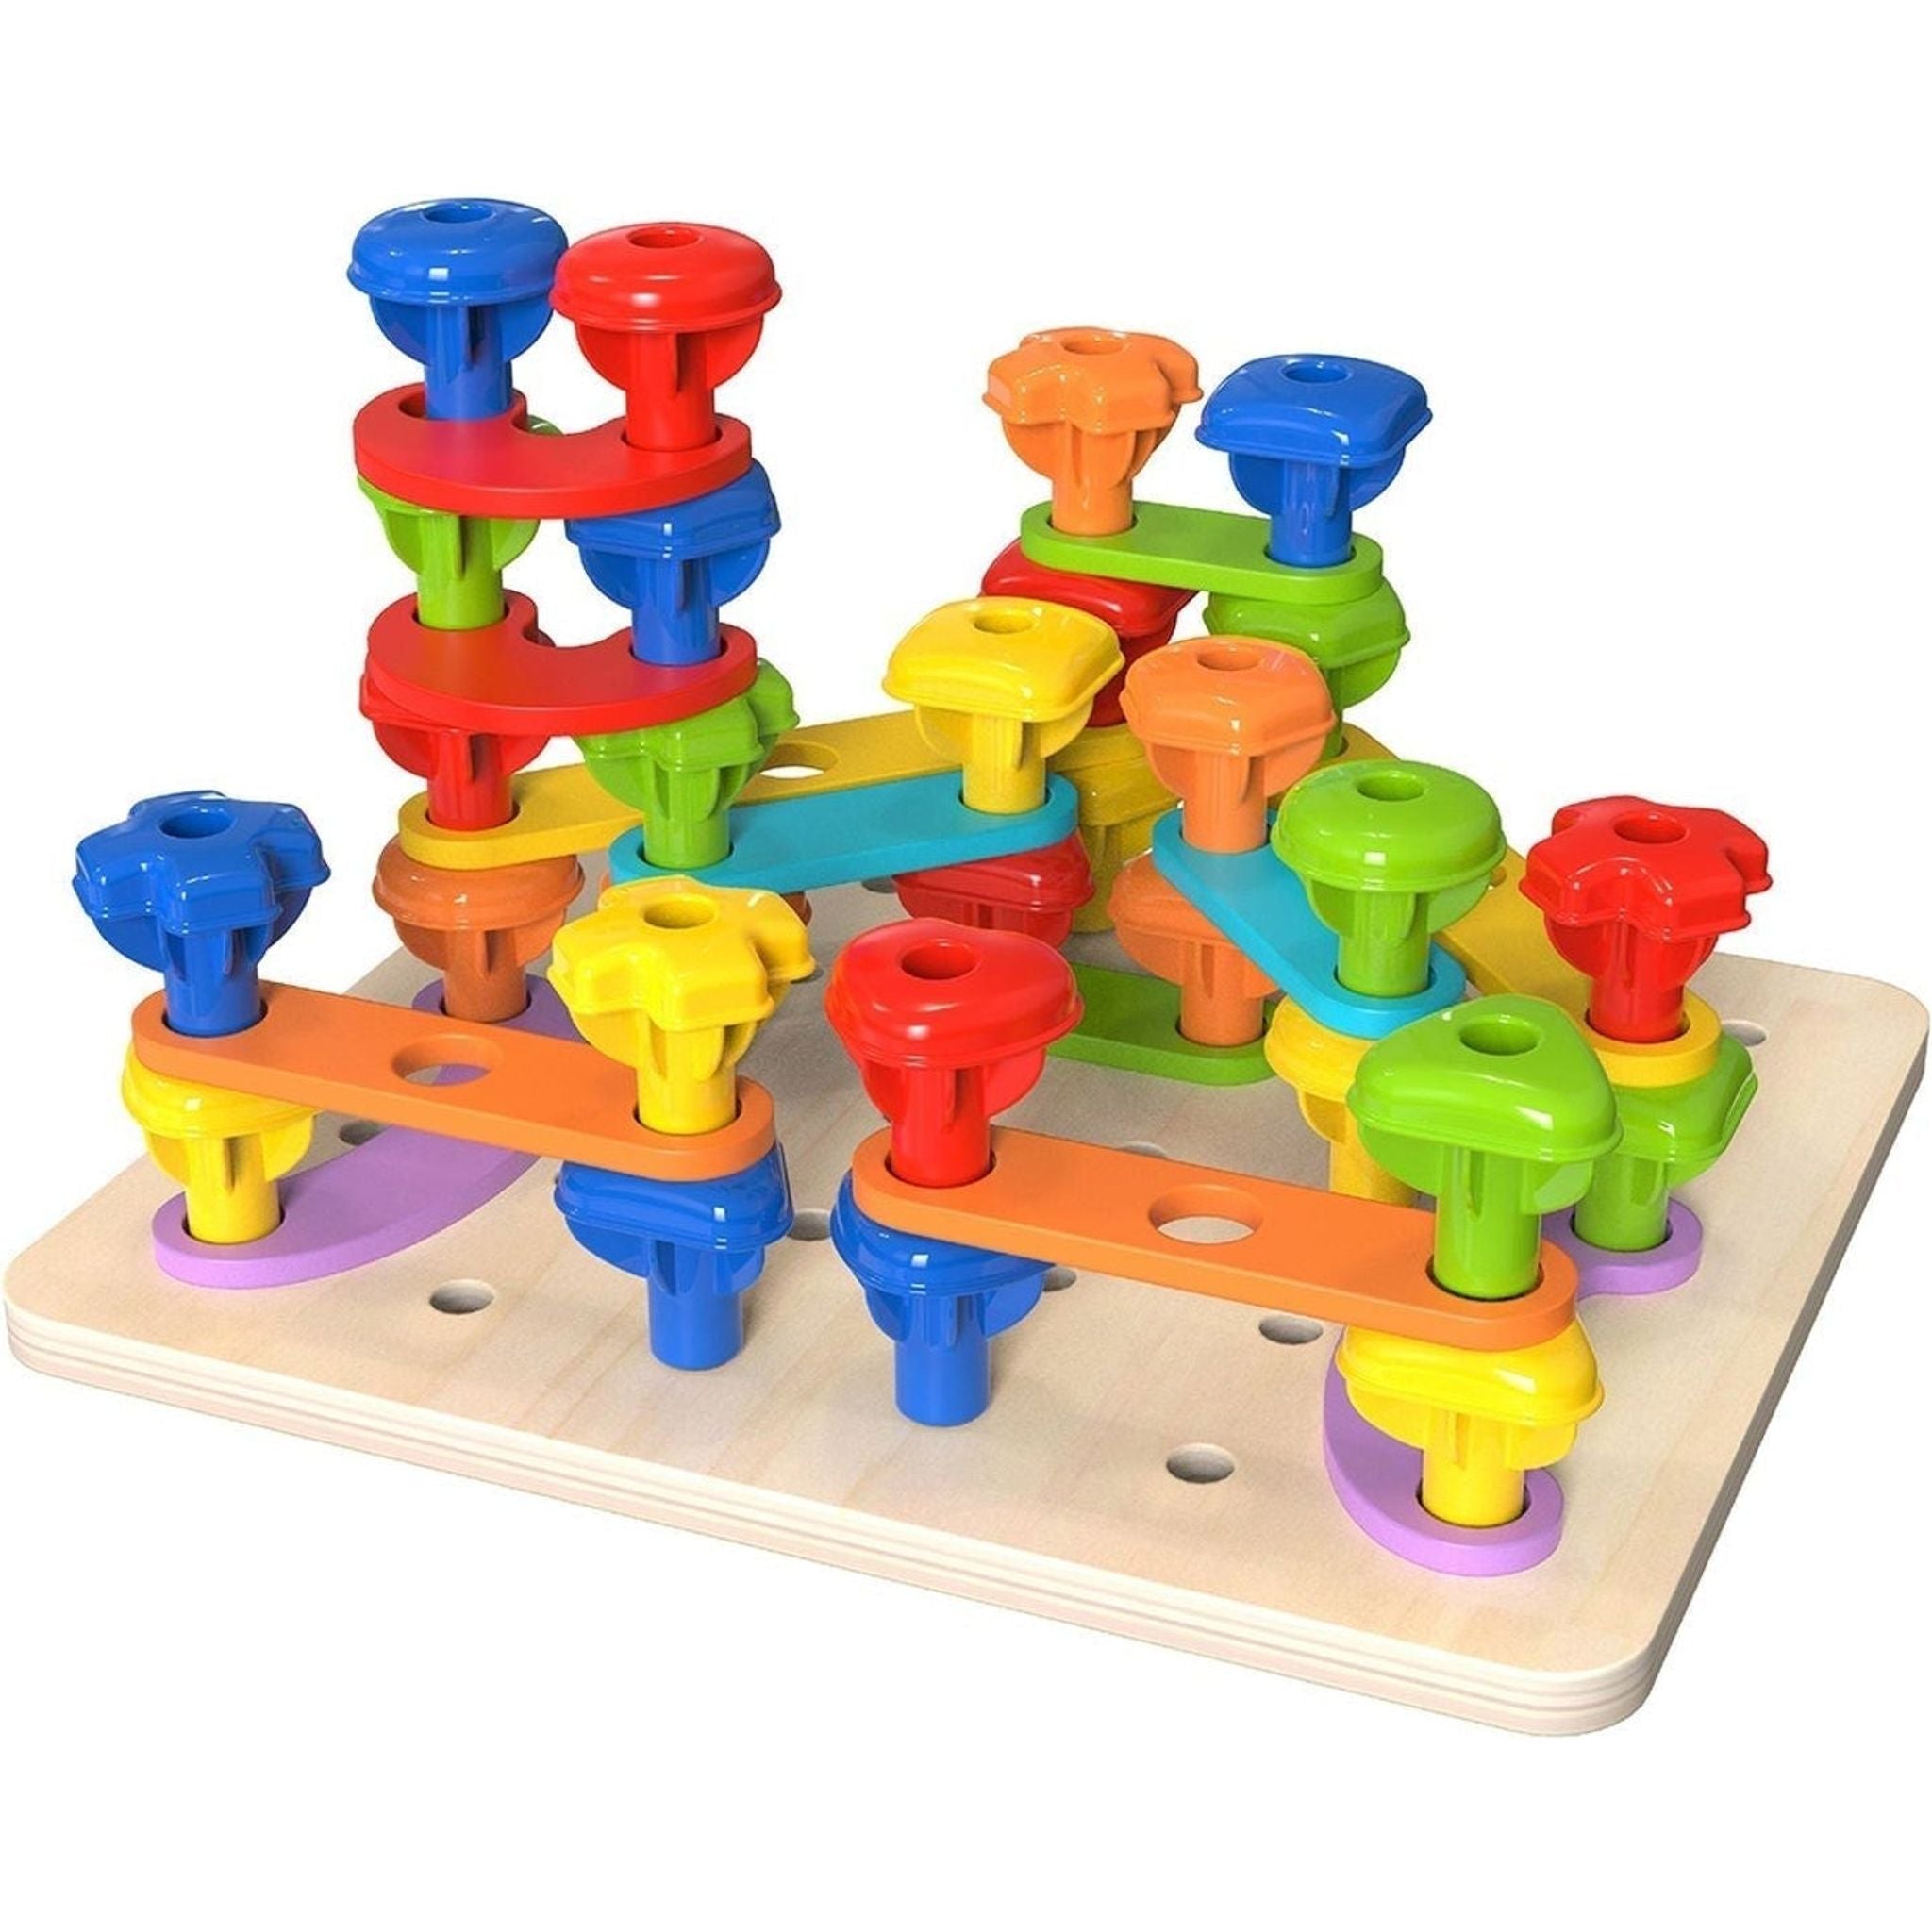 Rainbow Stacking Pegs - Toybox Tales